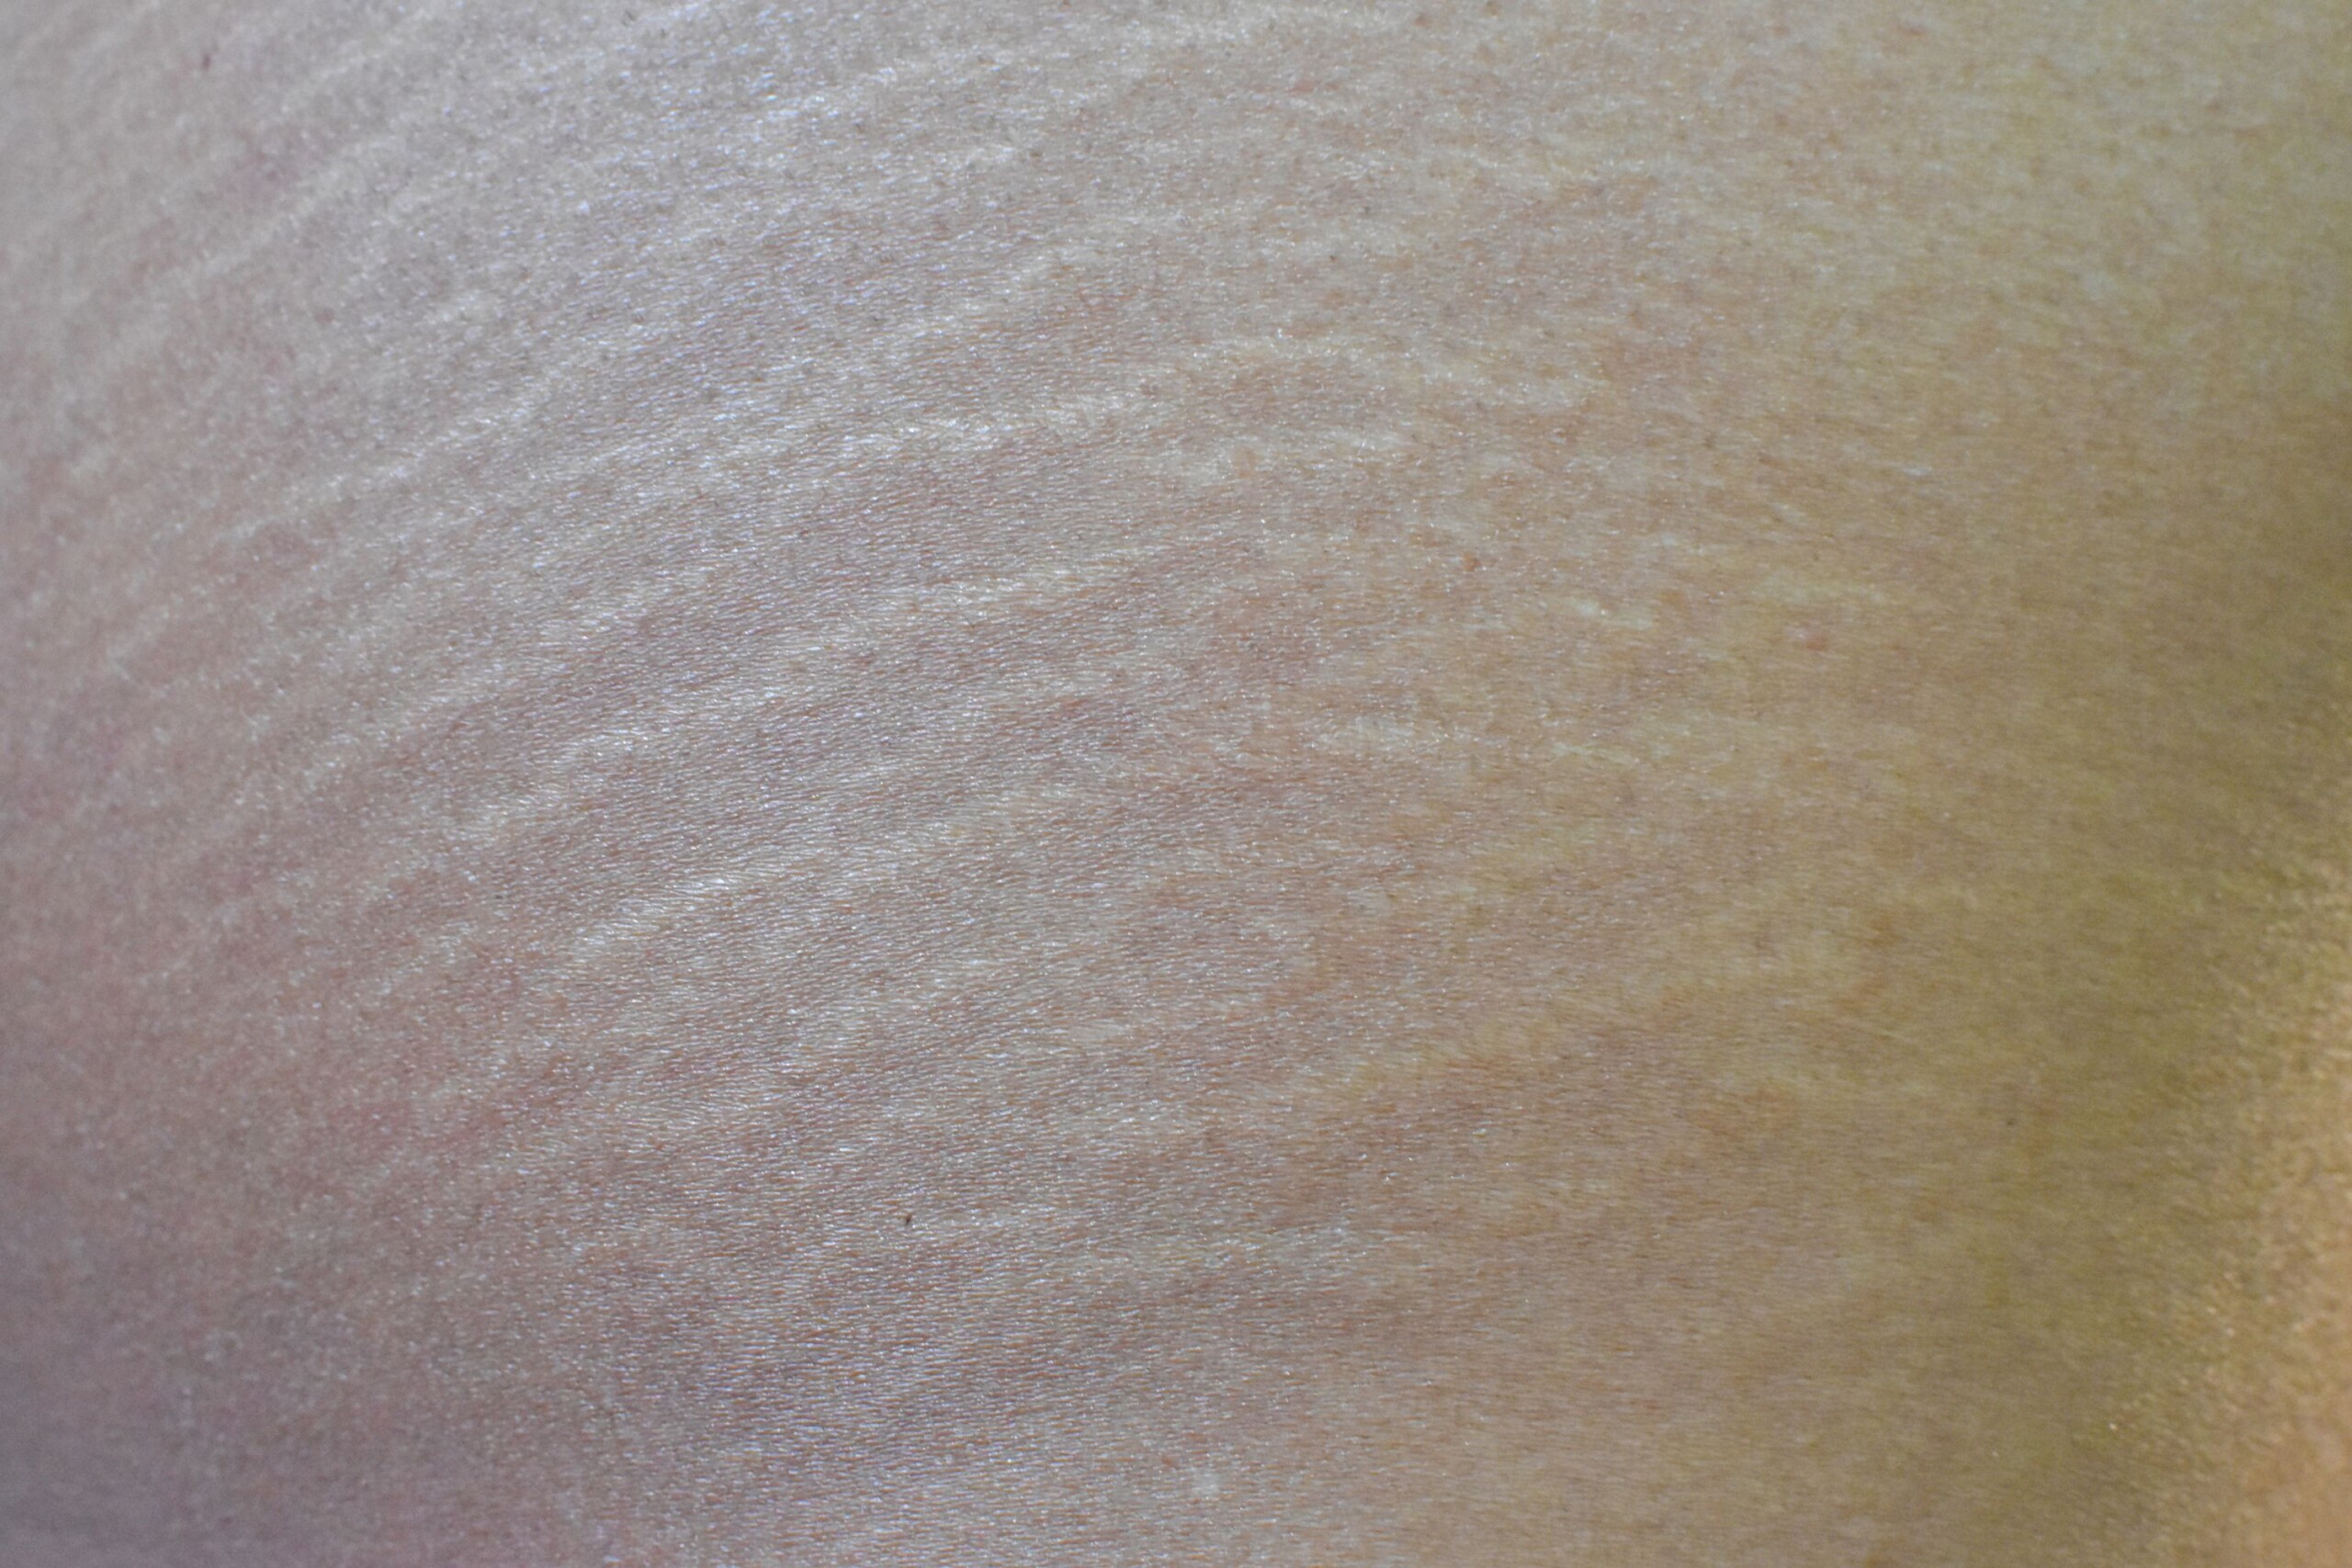 Fade Stretch Marks with Rosehip Oil